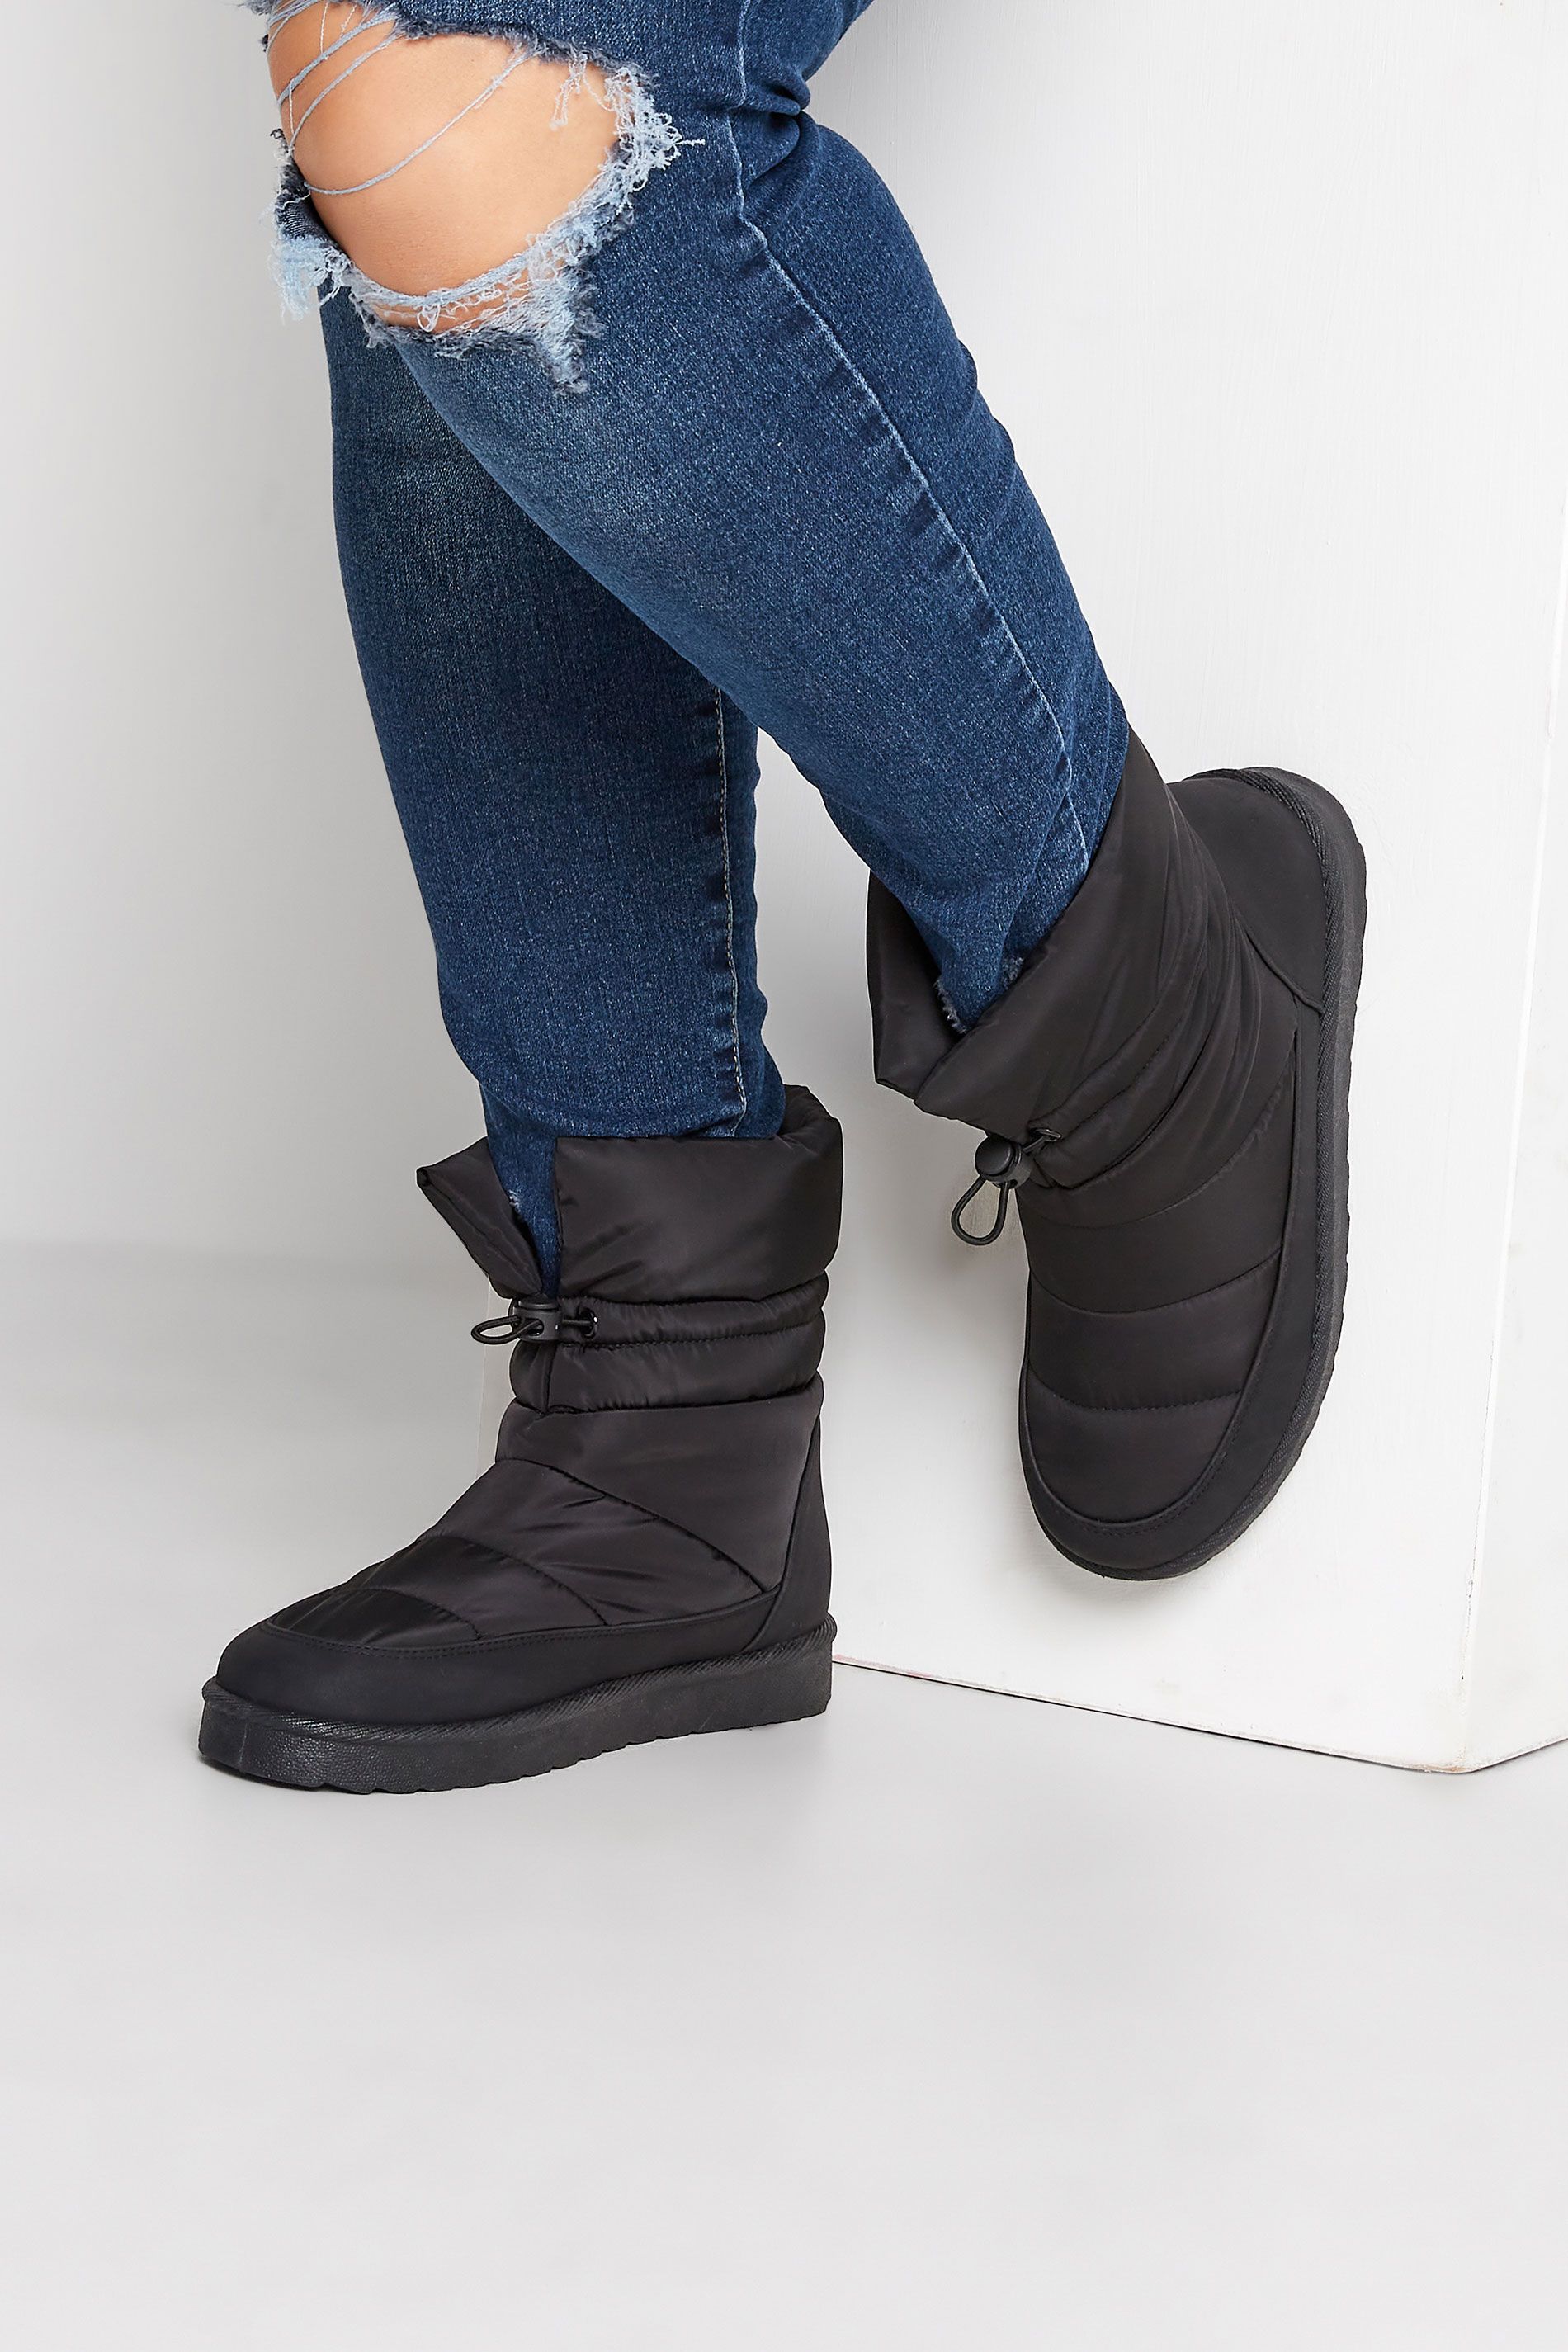 Yours Black Padded Snow Boots In Extra Wide EEE Fit | Long Tall Sally